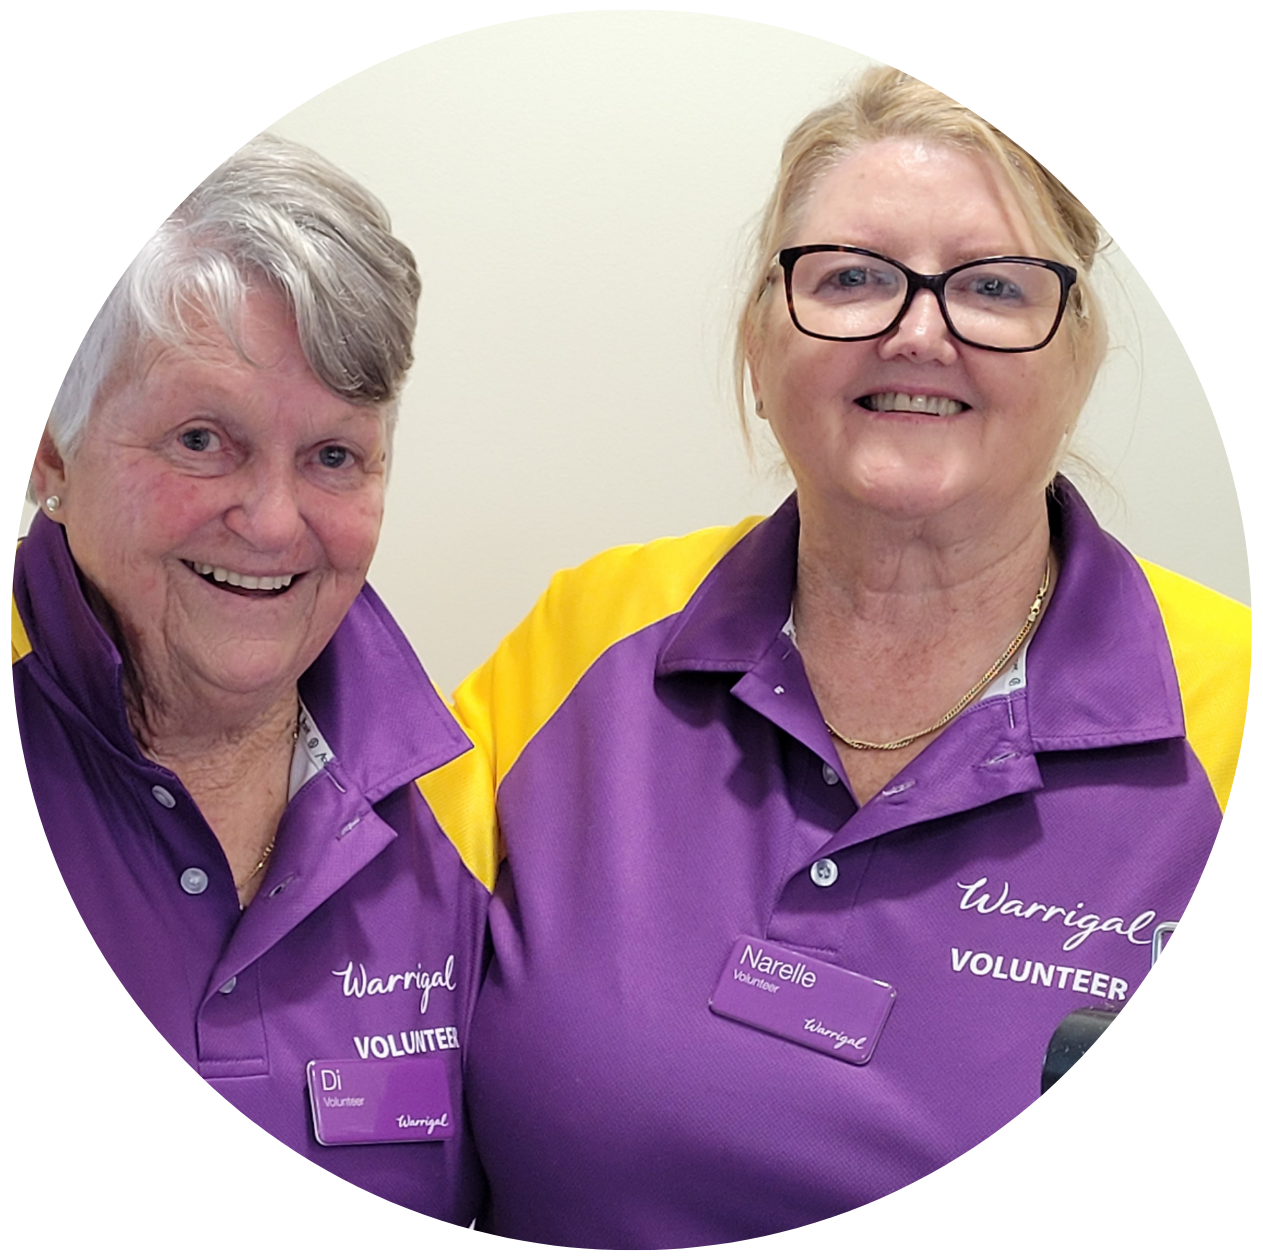 Warrigal Volunteers Narelle and Di smile happily in their purple shirts.